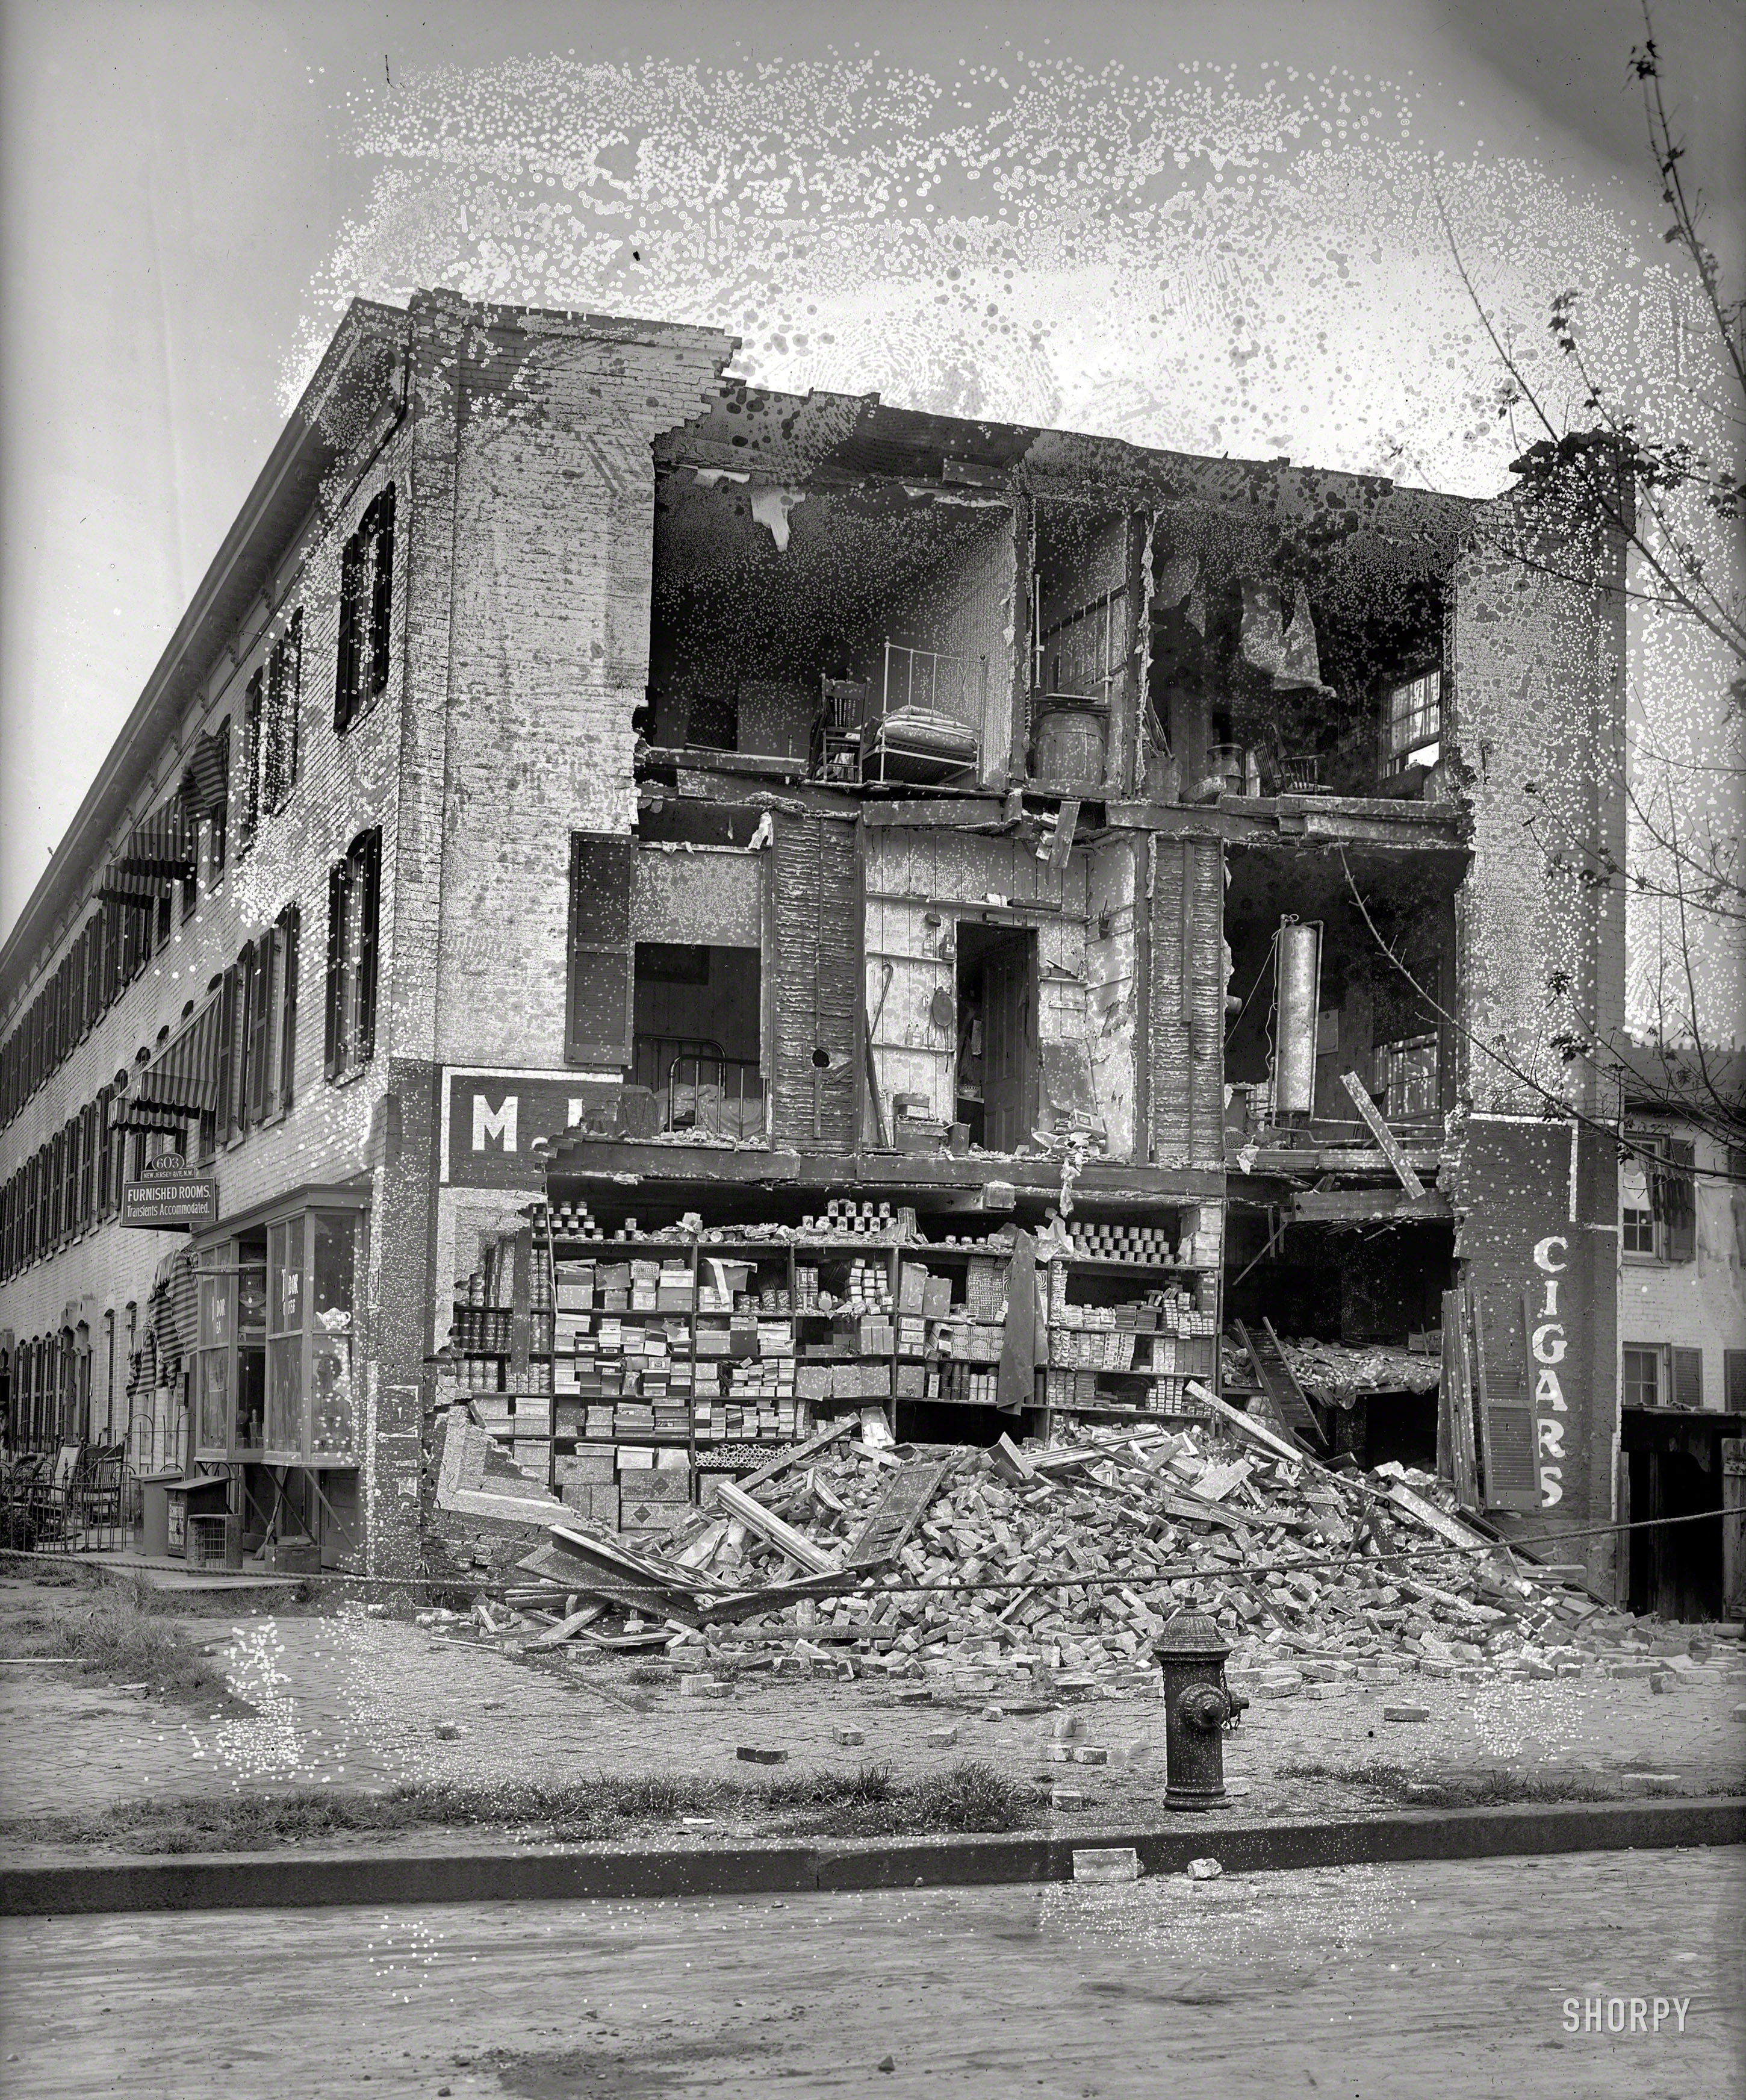 Washington, D.C., circa 1920s. "Wrecked house" is all it says on this undated (and moldy) 8x6 glass negative. Are there enough clues to fill in the blanks of this bricks-and-mortar mystery? National Photo Company. View full size.